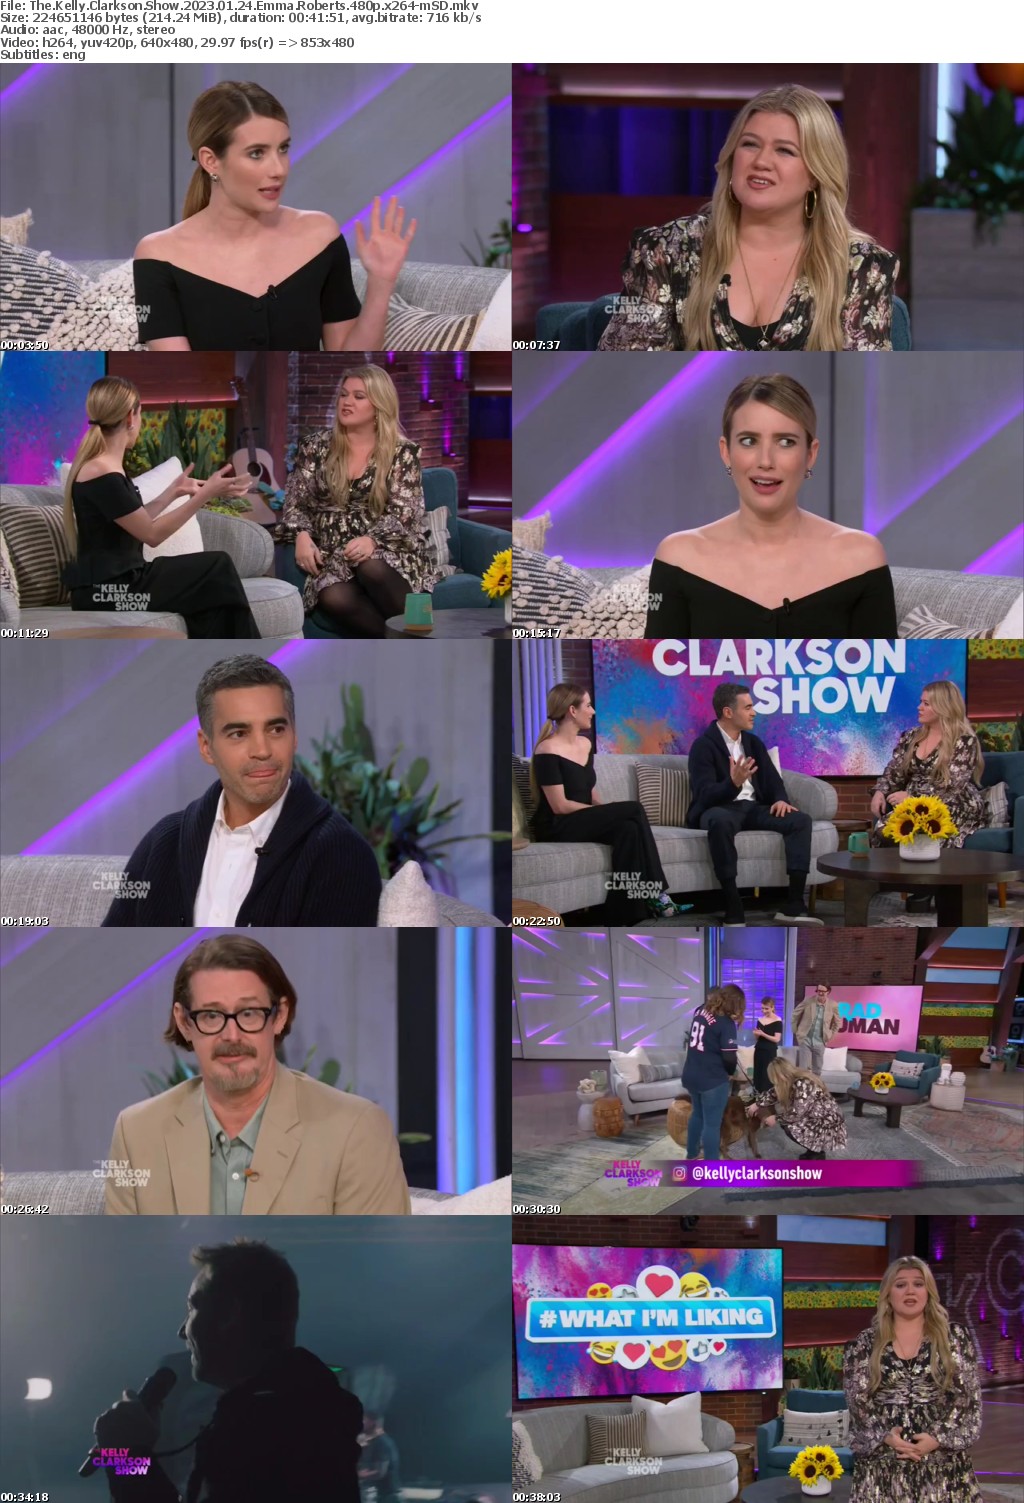 The Kelly Clarkson Show 2023 01 24 Emma Roberts 480p x264-mSD